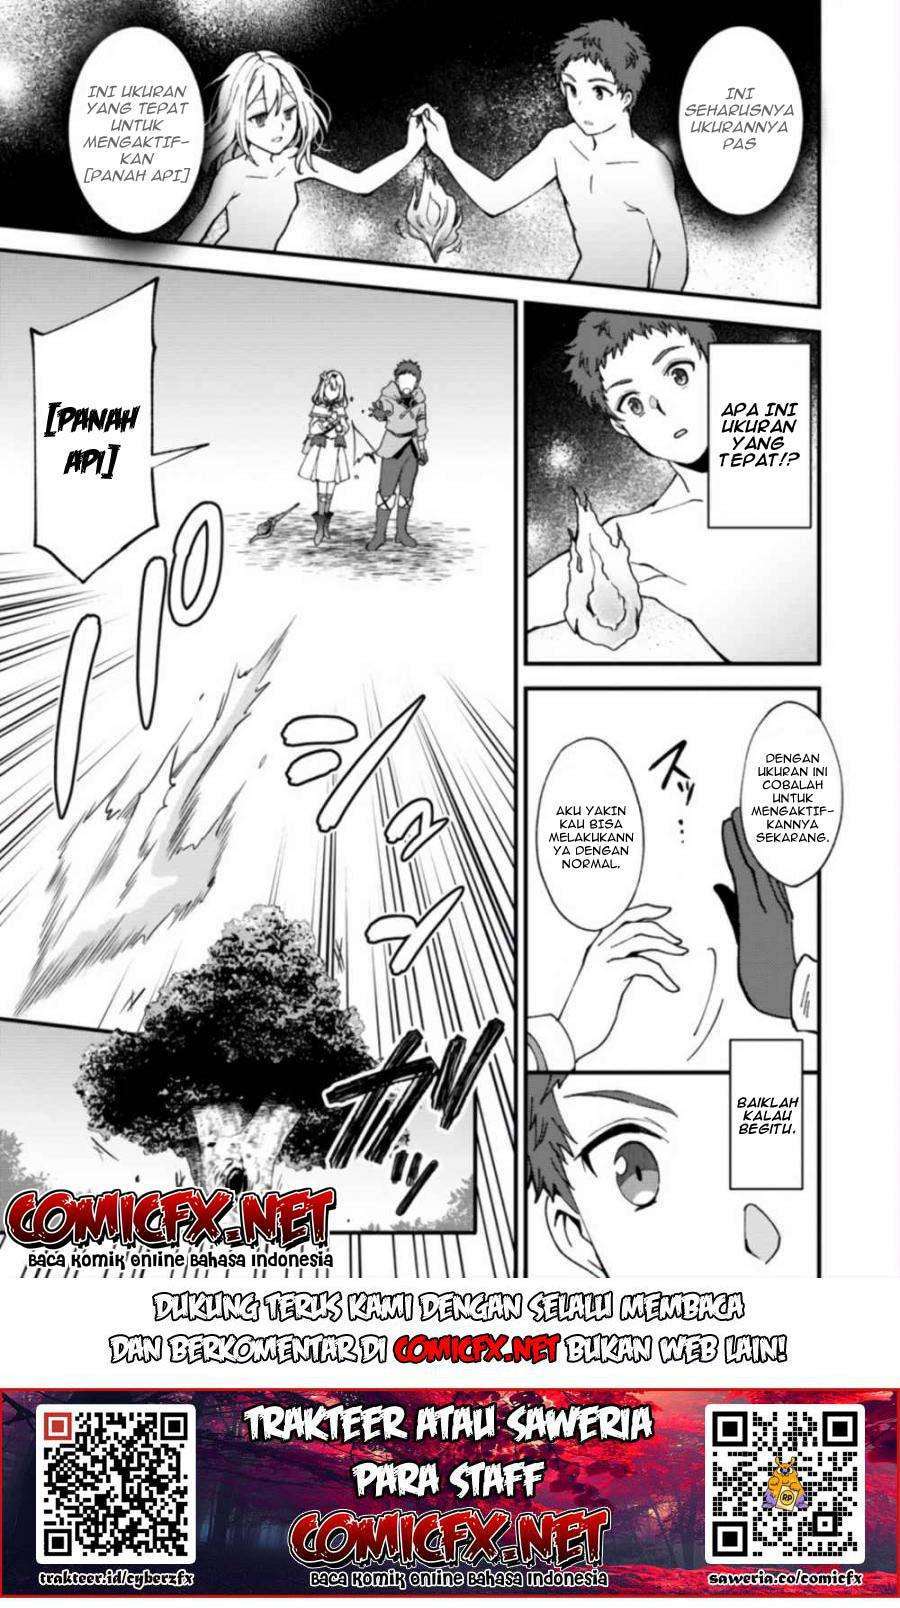 A Sword Master Childhood Friend Power Harassed Me Harshly, So I Broke off Our Relationship and Make a Fresh Start at the Frontier as a Magic Swordsman Chapter 04-2